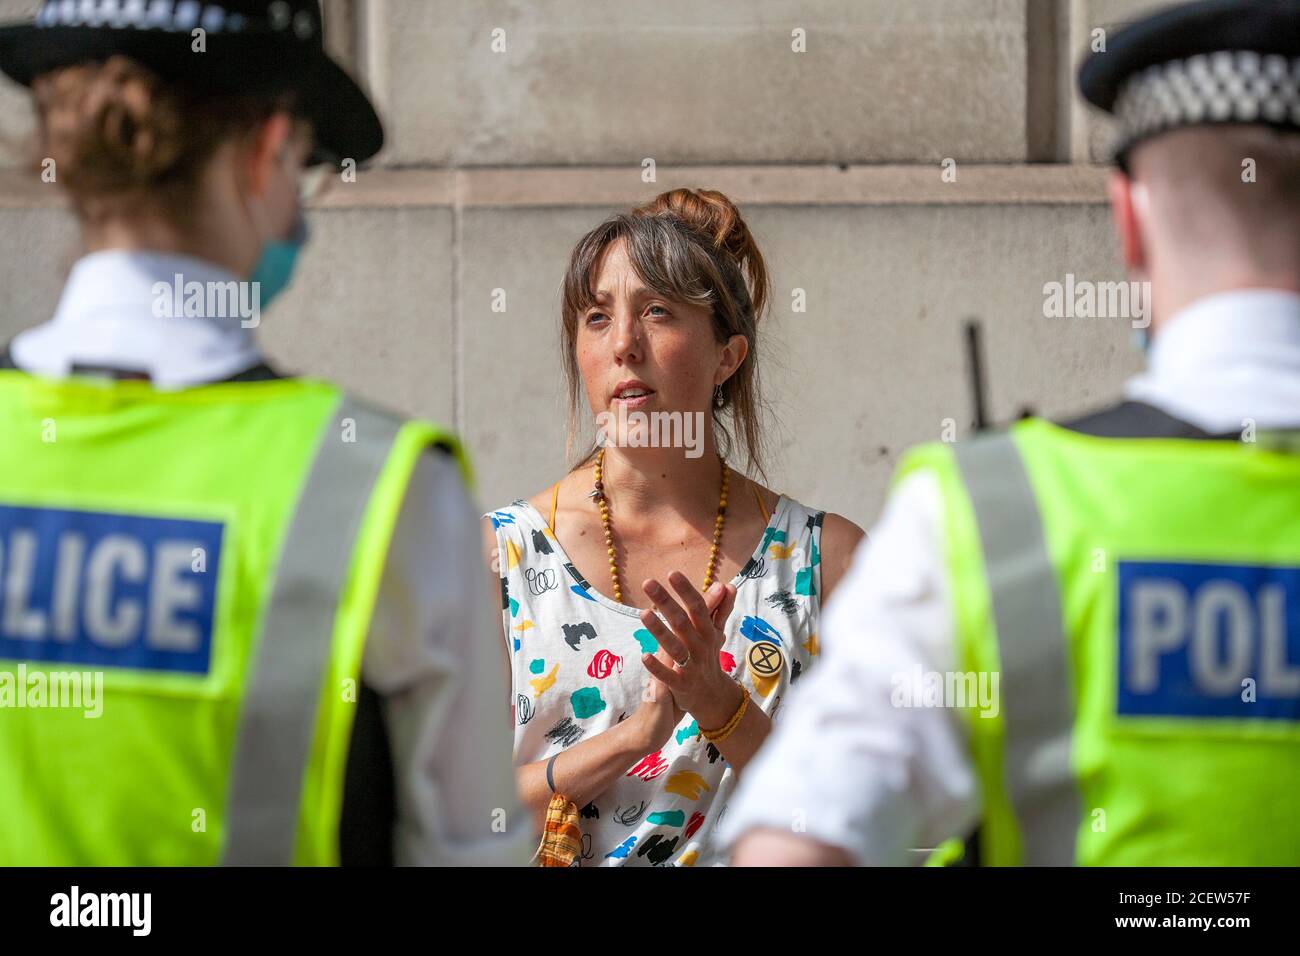 London, UK. 2nd September 2020. Extinction Rebellion protester sings and claps in front of police after being arrested, during the second day of demonstrations outside parliament. Frustrated with the government’s failure to act on the climate and ecological emergency, XR continue to protest for change. The Climate and Ecological Emergency Bill (CEE Bill), is the only concrete plan available to address this crisis, and so in their first week back in Parliament, XR demand the government Act Now and embrace this legislation. Credit: Neil Atkinson/Alamy Live News. Stock Photo